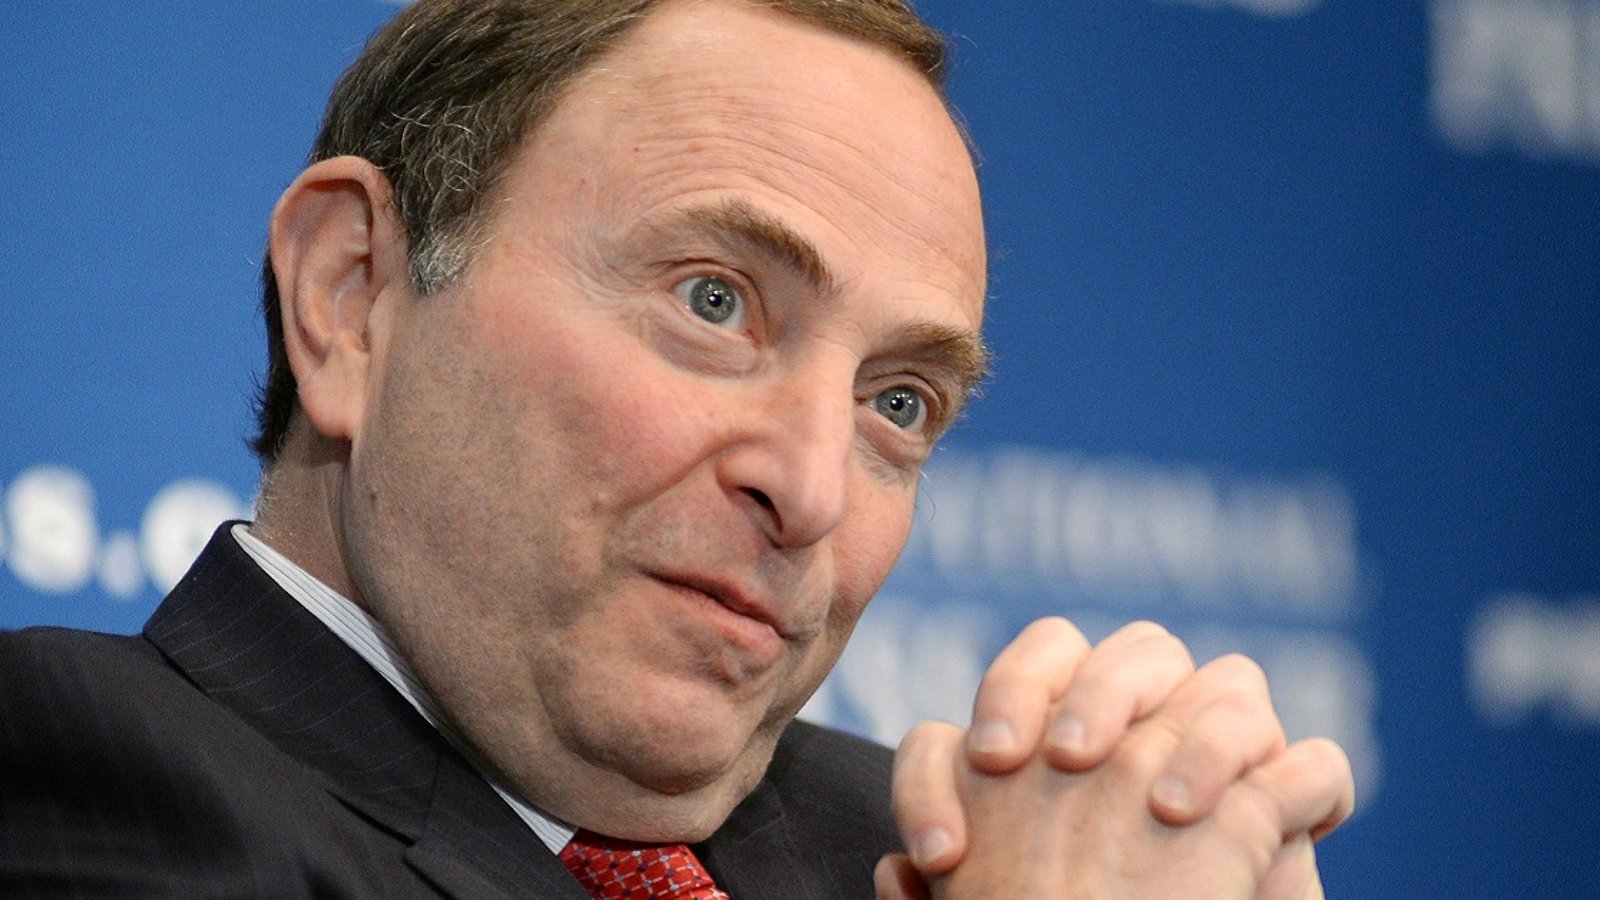 Breaking: Bettman confirms he is in talks with city Mayor to build a new NHL arena.